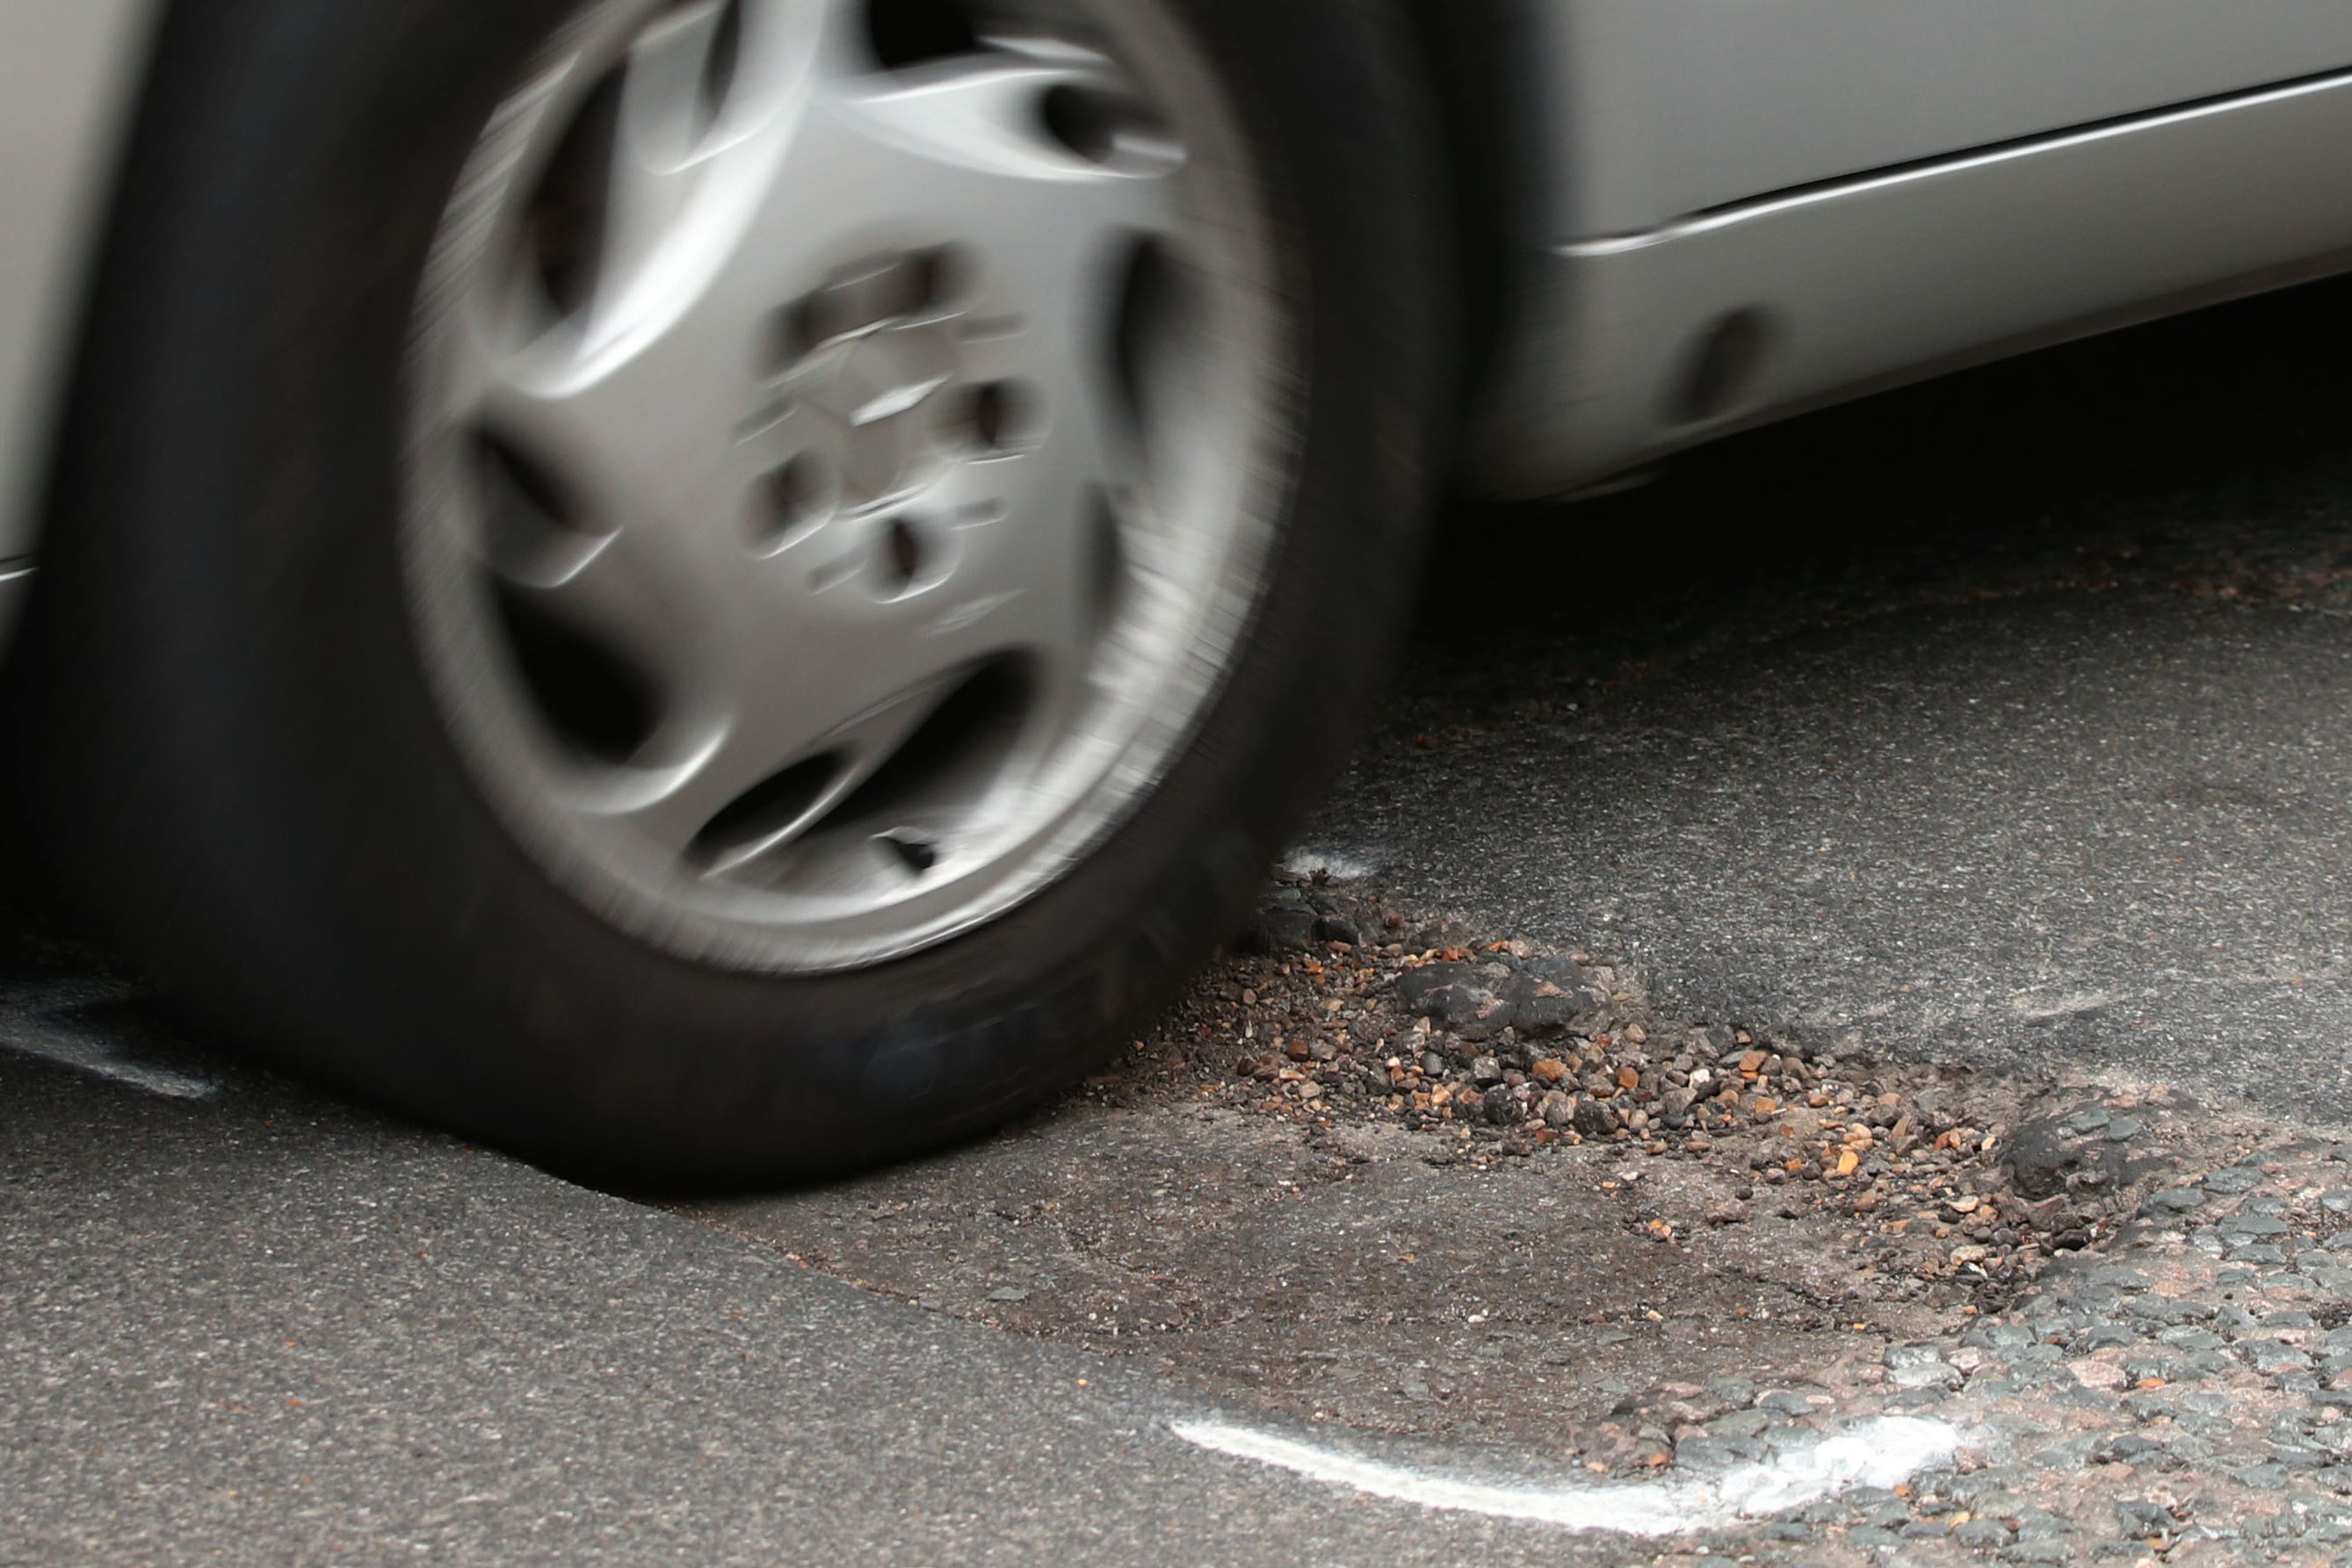 Shortfalls in pothole repair budgets among local authorities have reached a record high, according to research (Yui Mok/PA)